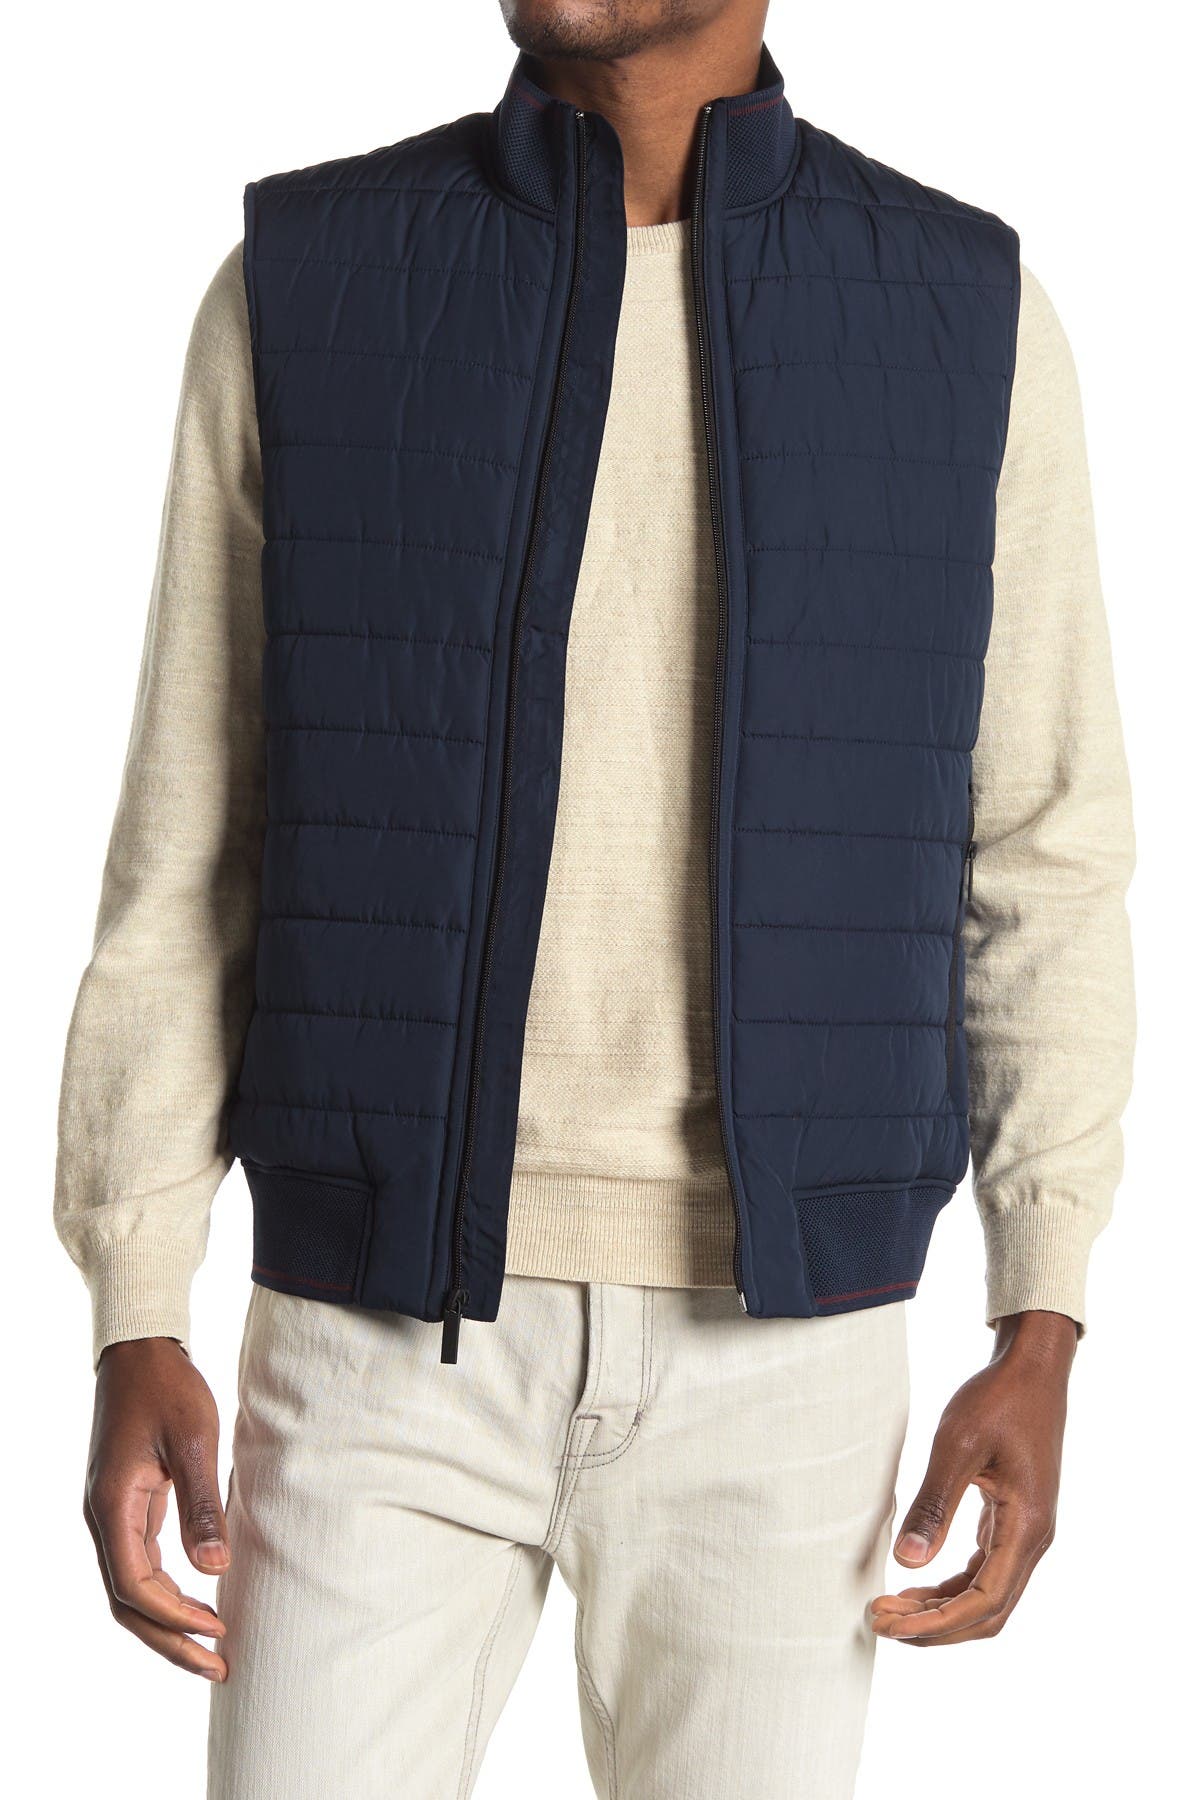 Perry Ellis mens Systems Jacket With Vestee